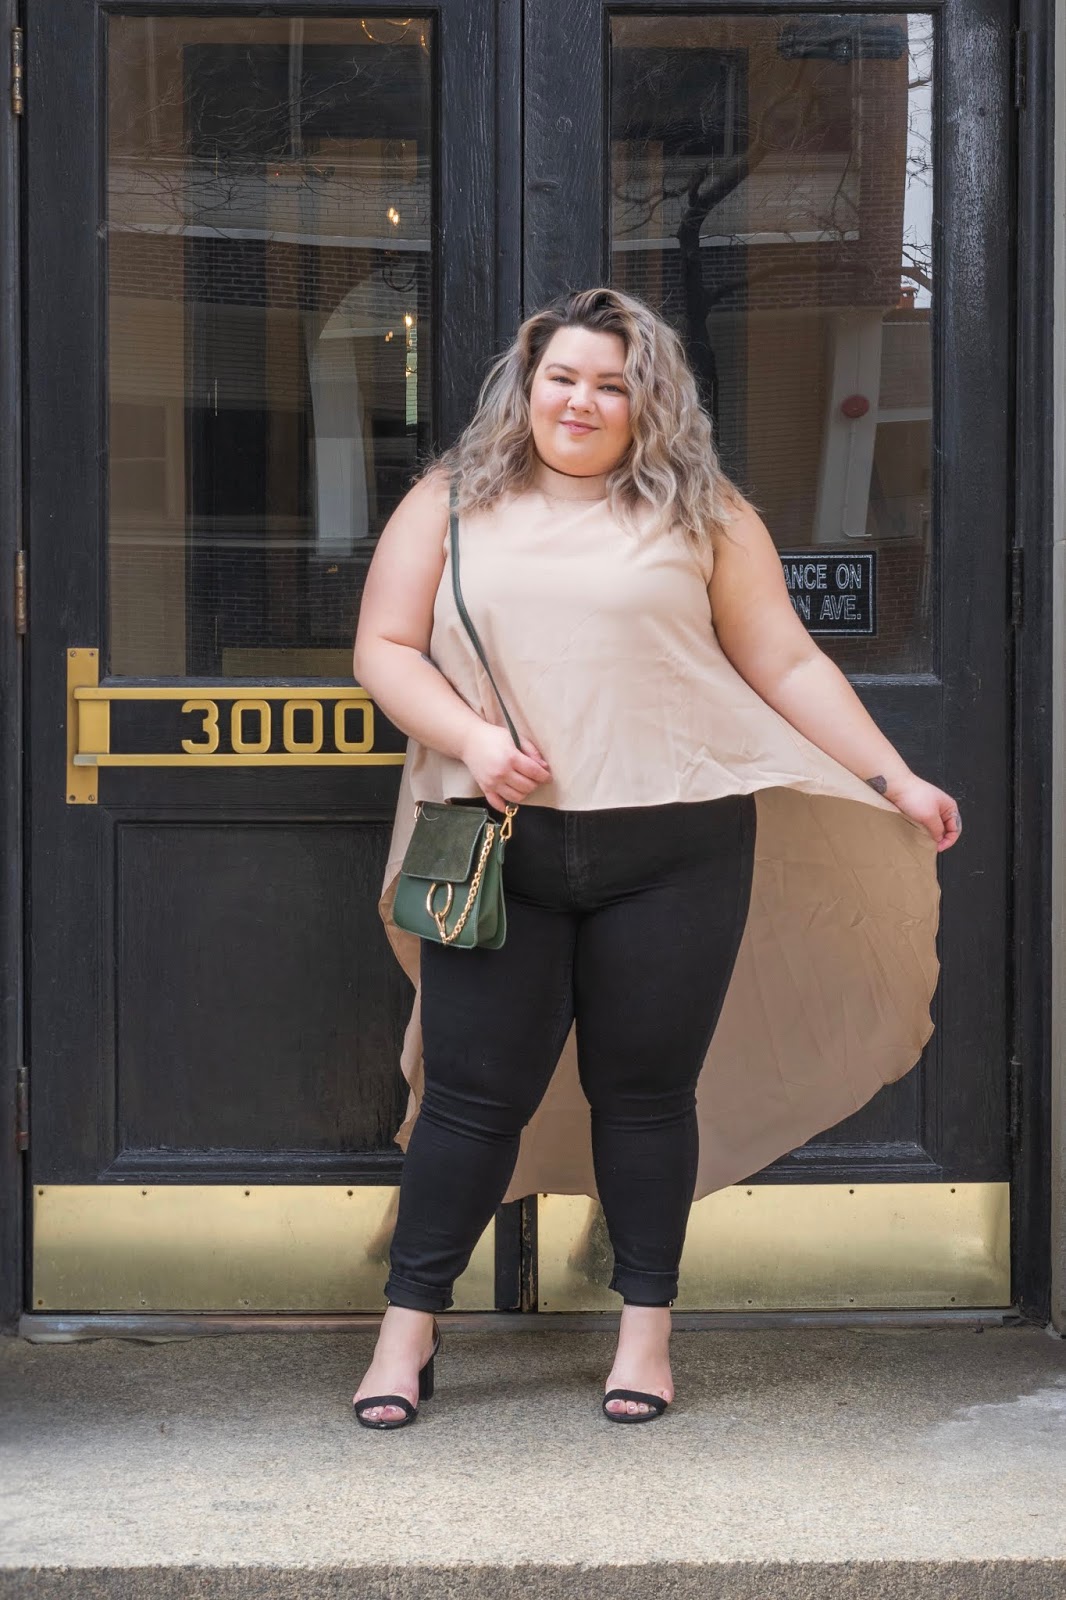 Chicago Plus Size Petite Fashion Blogger, YouTuber, and model Natalie Craig, of Natalie in the City, review's Fashion Nova's hi-lo tops and jeans.